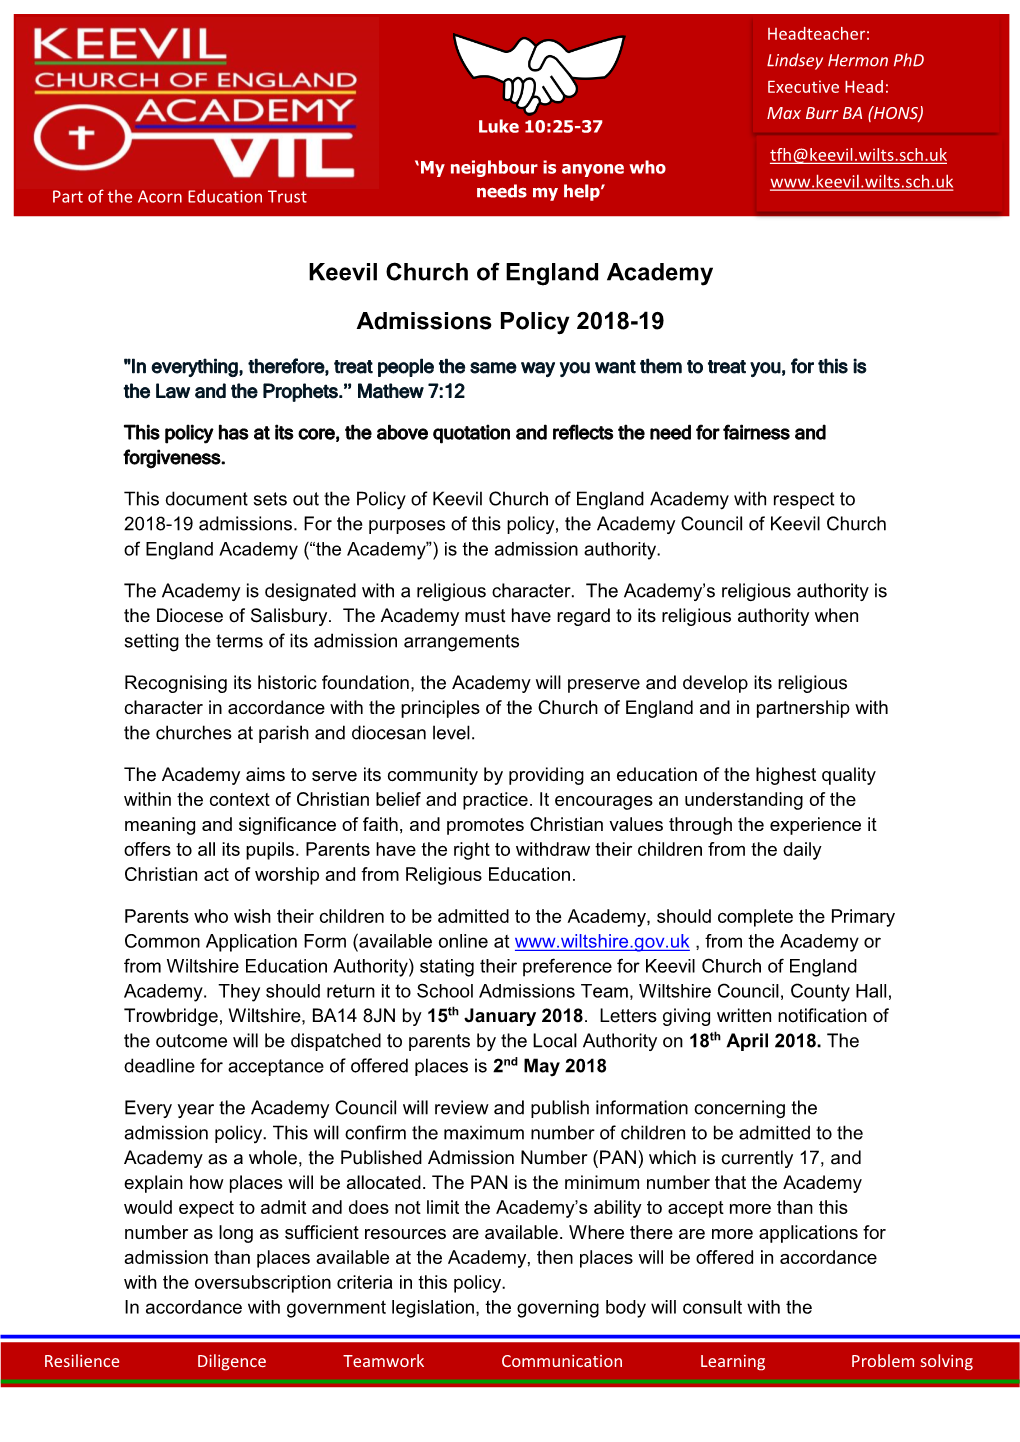 Keevil Church of England Academy Admissions Policy 2018-19